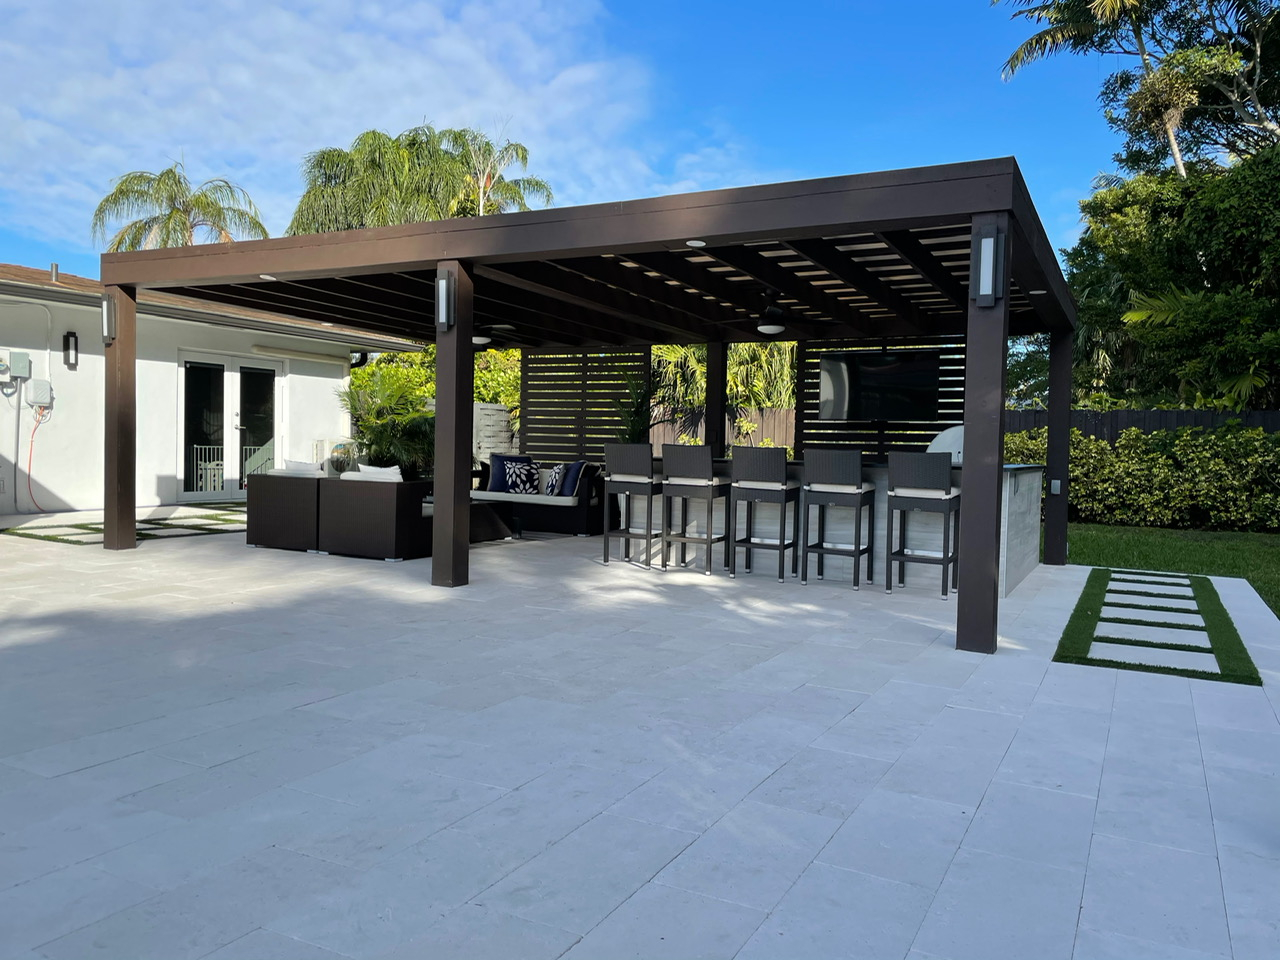 Pergolas In Miami: What Makes It One Of The Most Popular Home Features?